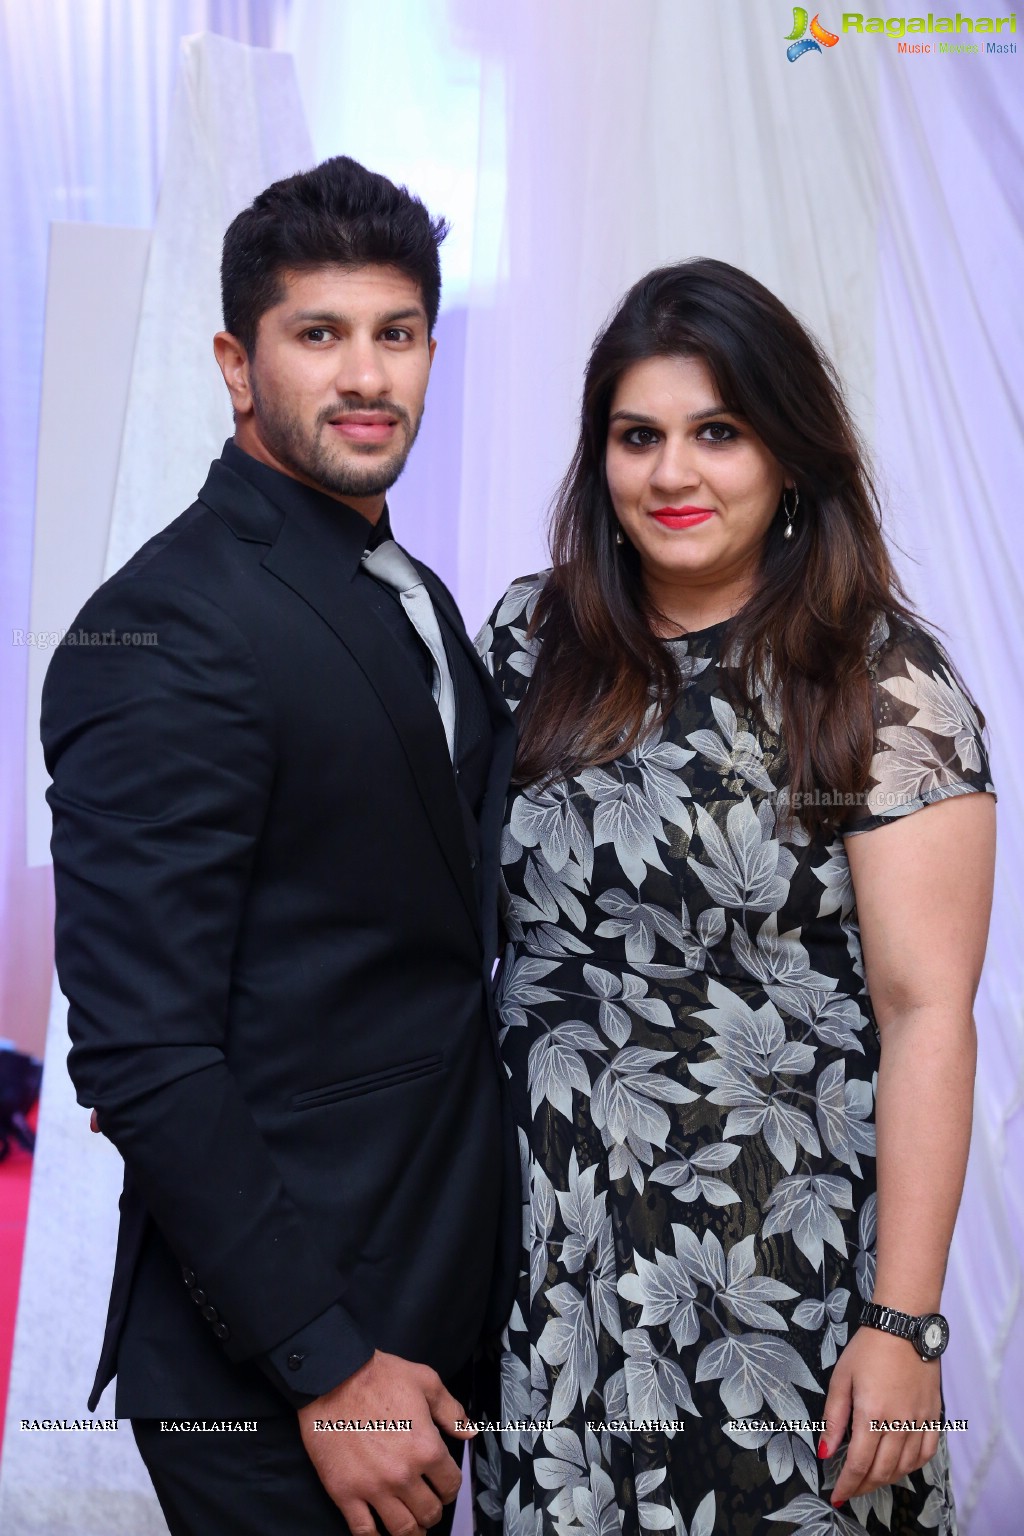 You & I Magazine 10th Anniversary Celebrations - Hosted by Huma and Asad at Novotel Hyderabad Convention Centre